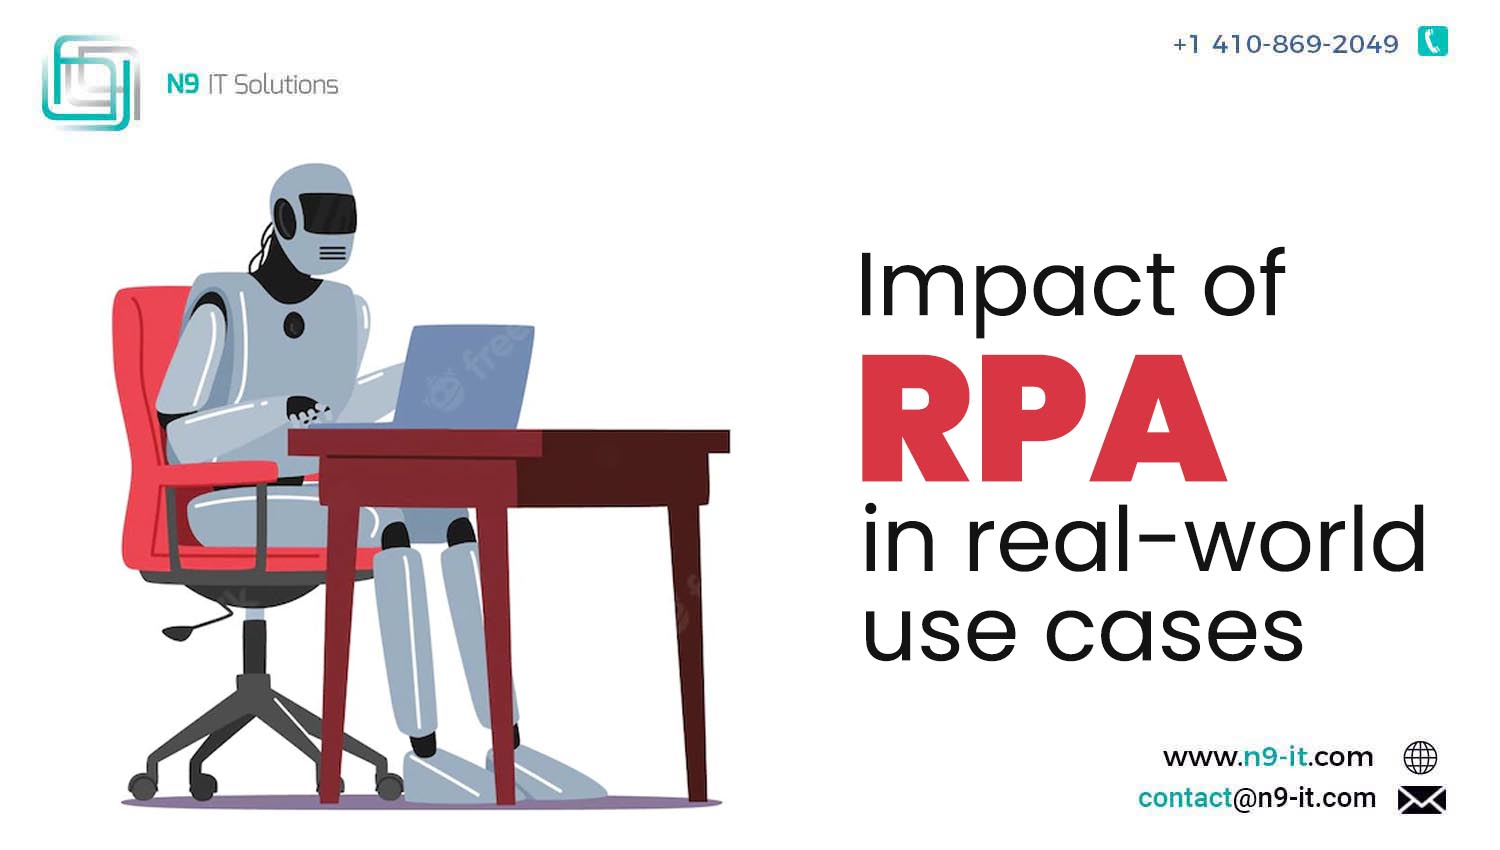 Impact of RPA in real-world use cases